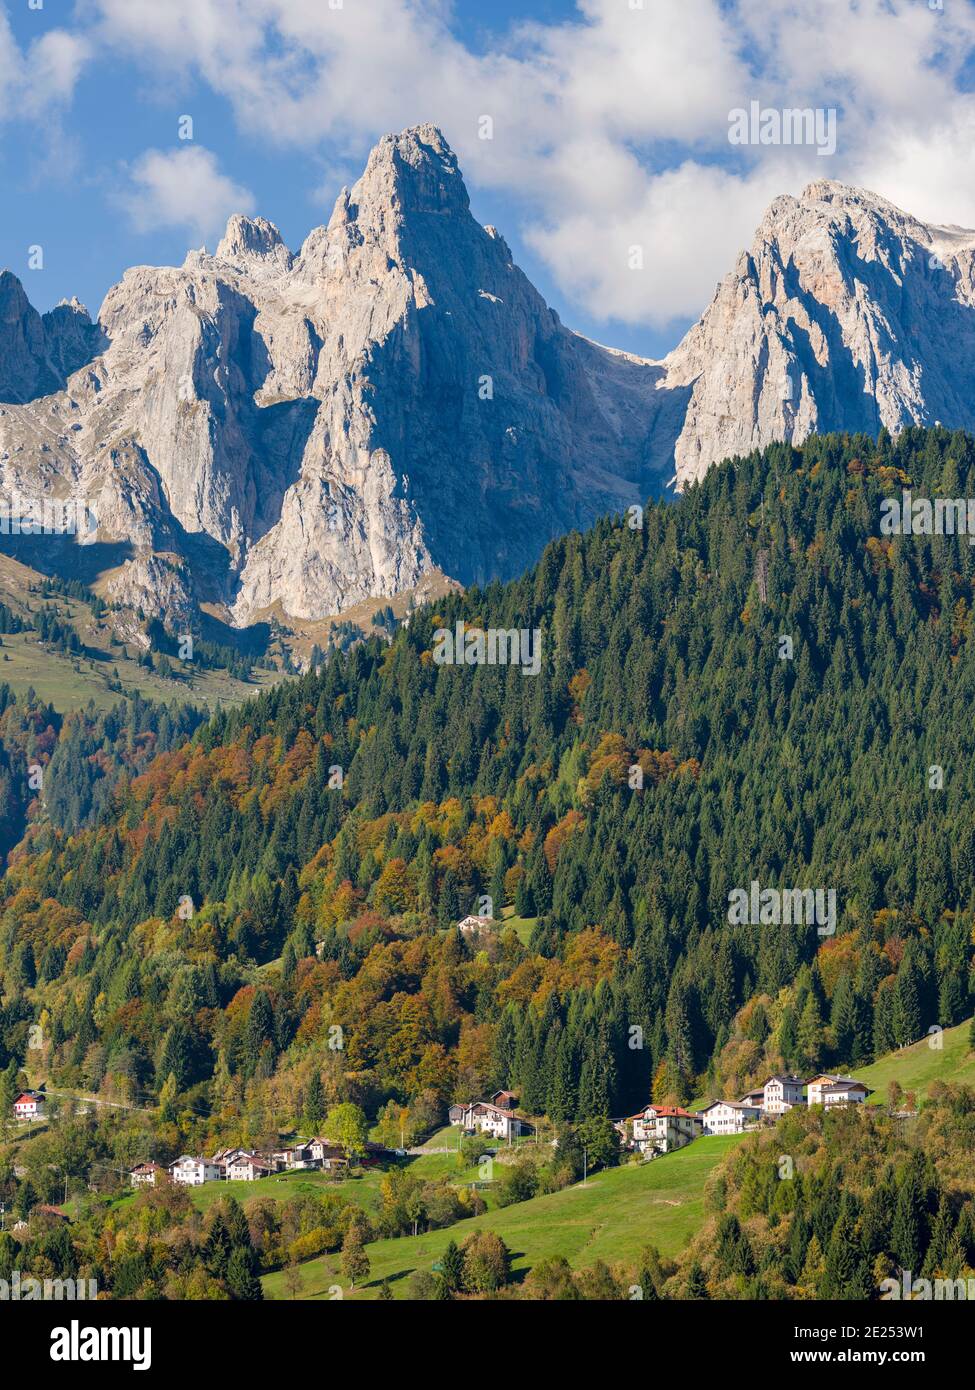 Villages Sarasin and Pongan in the  Veneto under the peaks of the mountain range Pale di San Martino, part of UNESCO world heritage Dolomites.  Europe Stock Photo